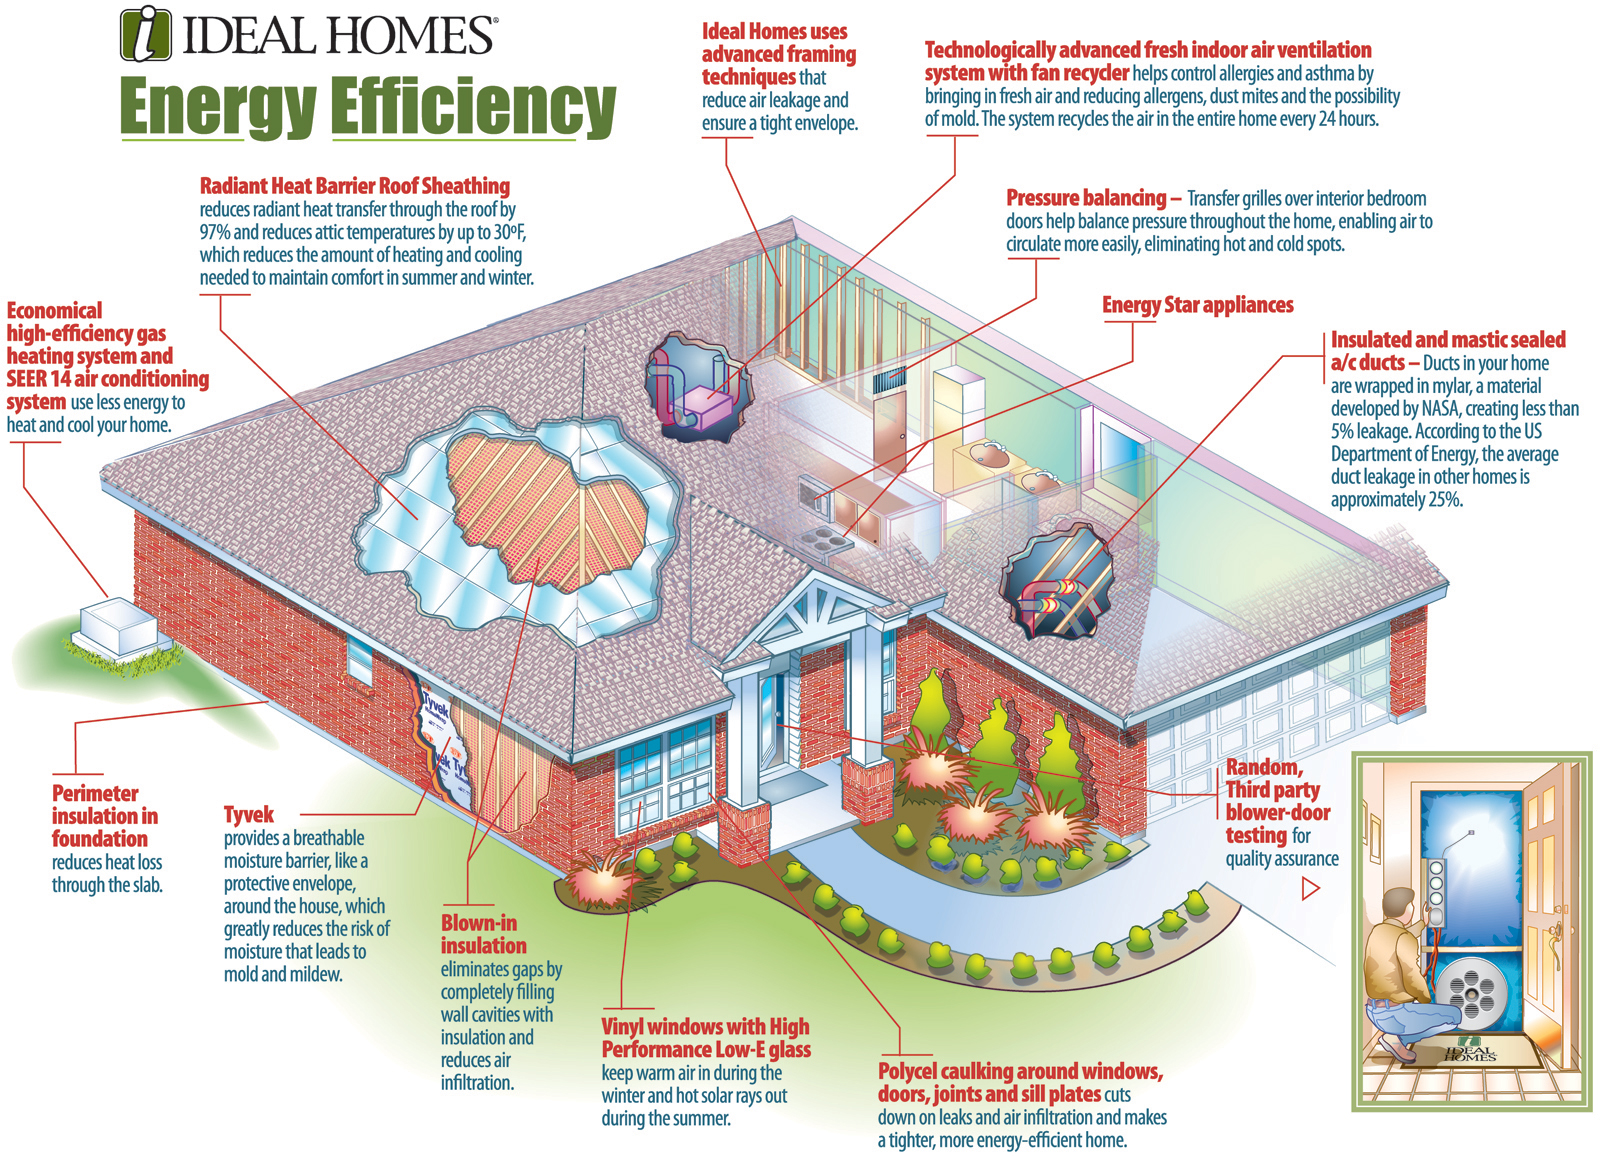 Planning energy efficiency before a home is built